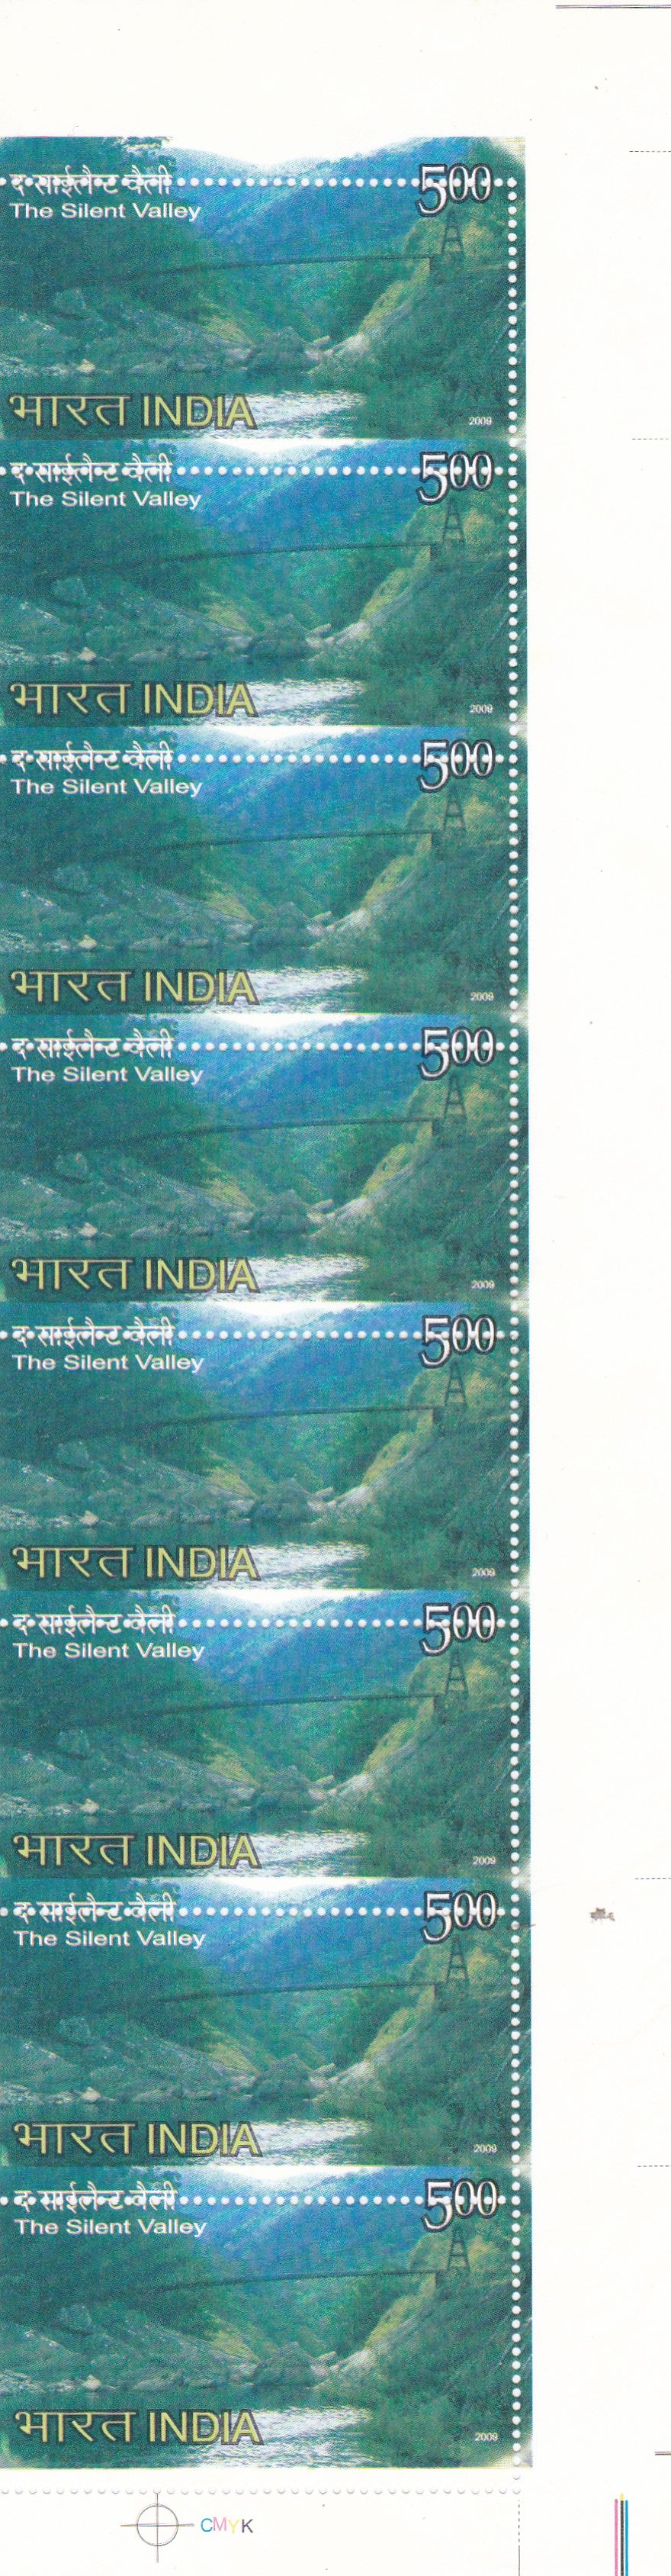 India -2009 Silent valley perforation error strips of 8 stamps.